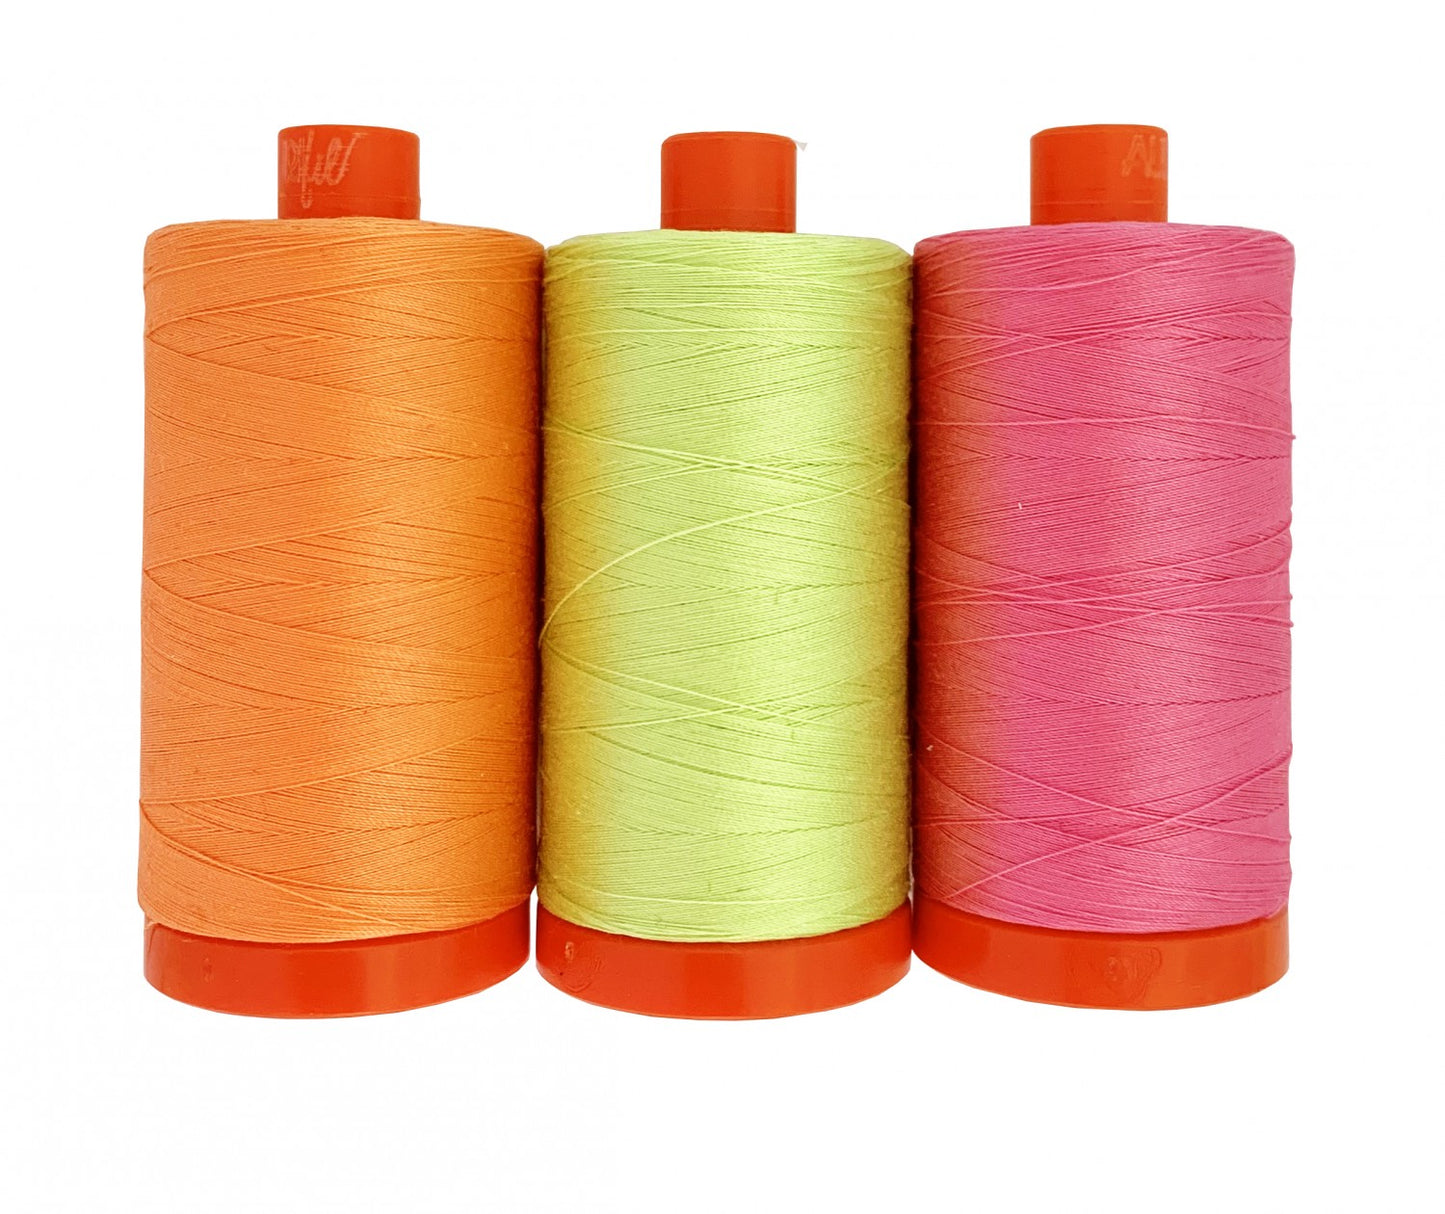 Neons and Neutrals 3 Large Spools - Aurifil Thread Collection | Tula Pink